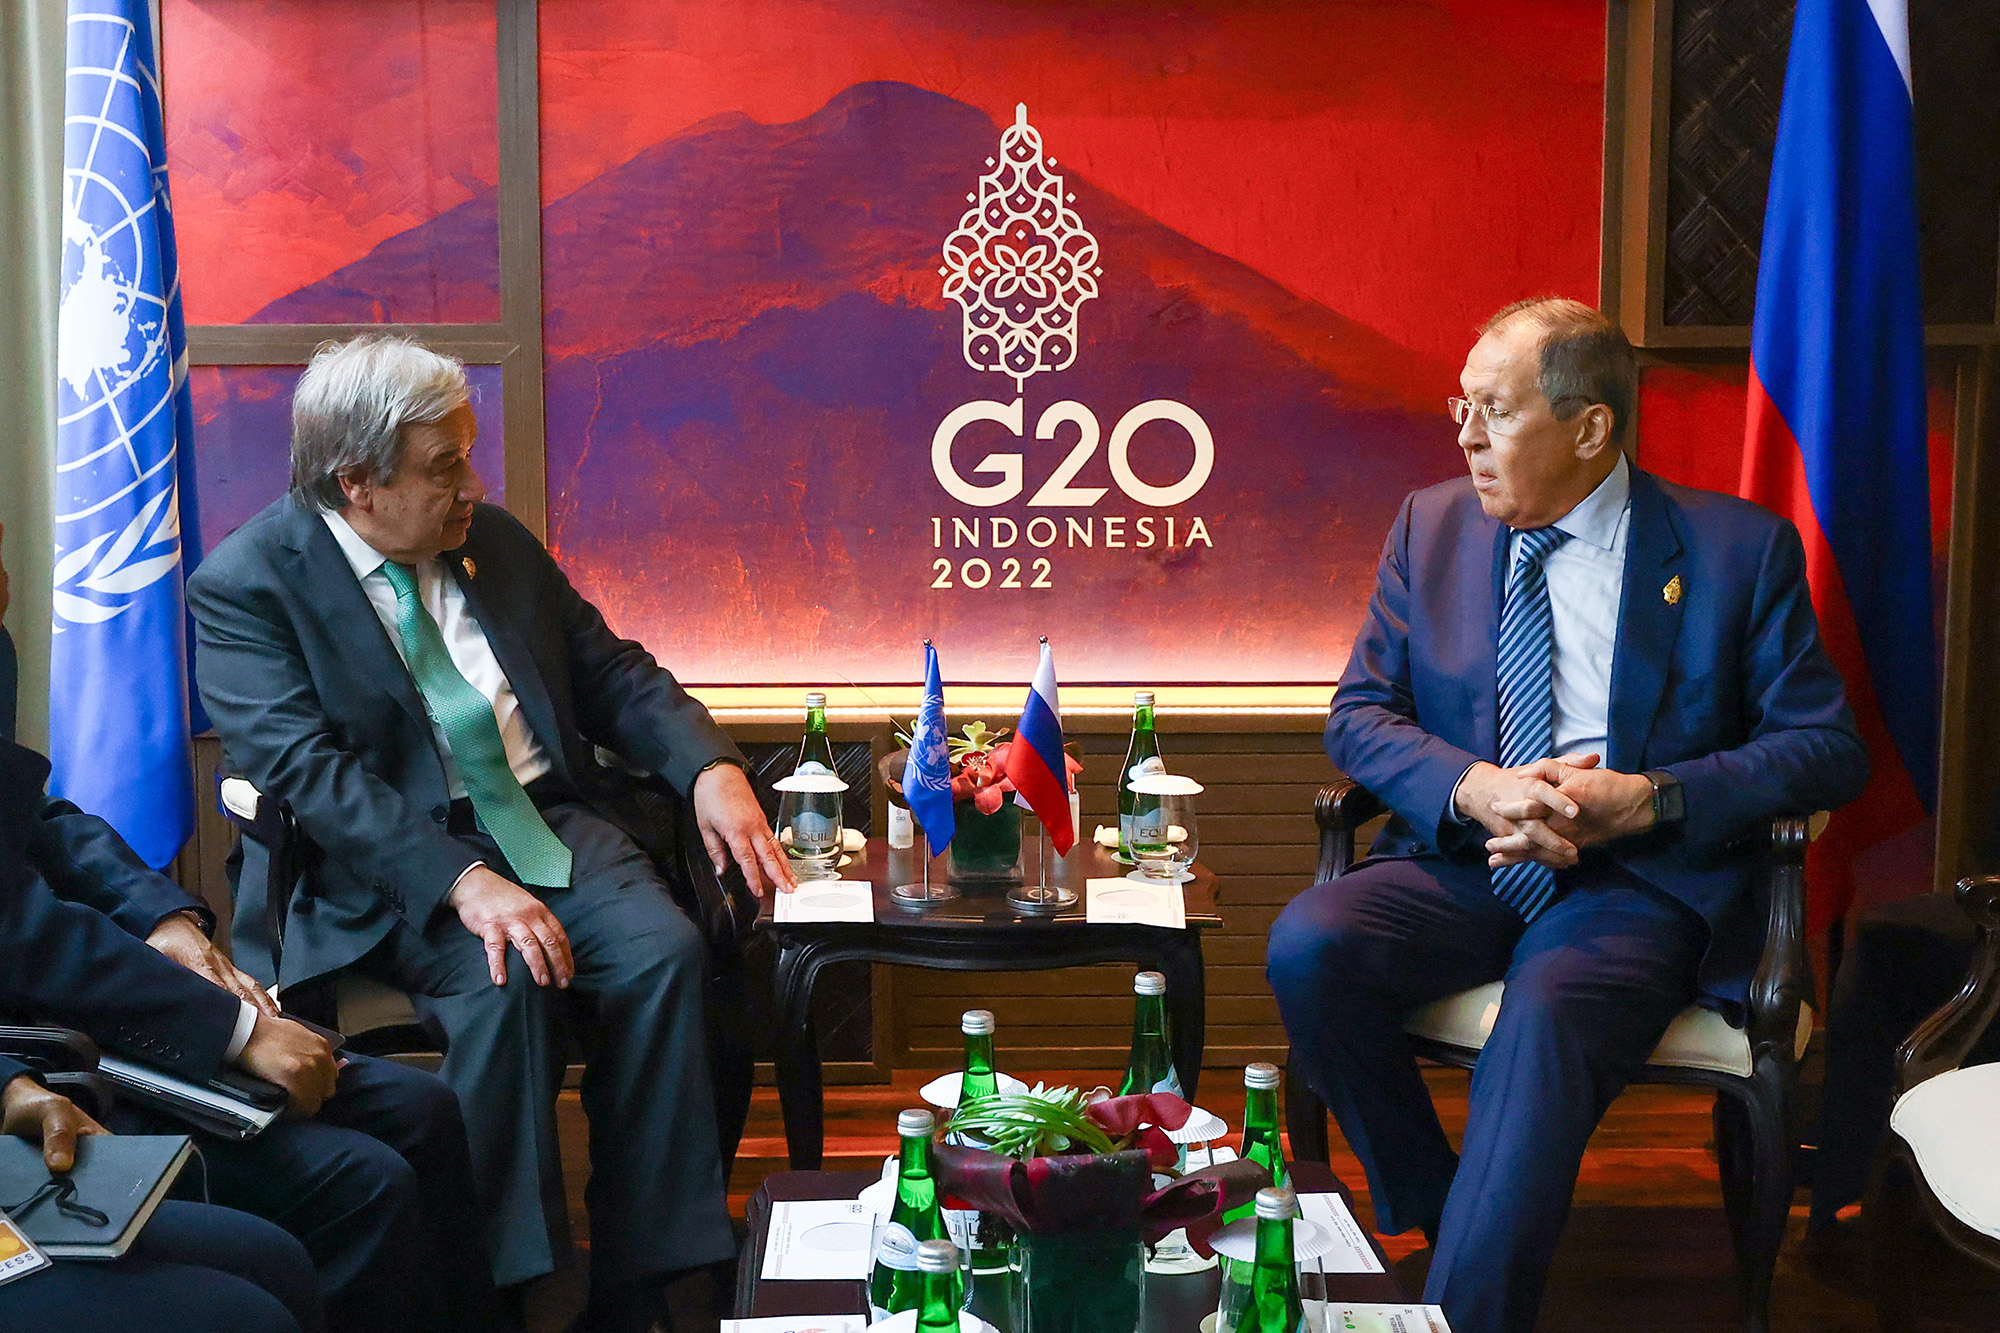 Russian Foreign Minister Sergey Lavrov, right, and Secretary-General of the United Nations Antonio Guterres attend a meeting on the sidelines of the G20 summit in Bali, Indonesia, on November 15.